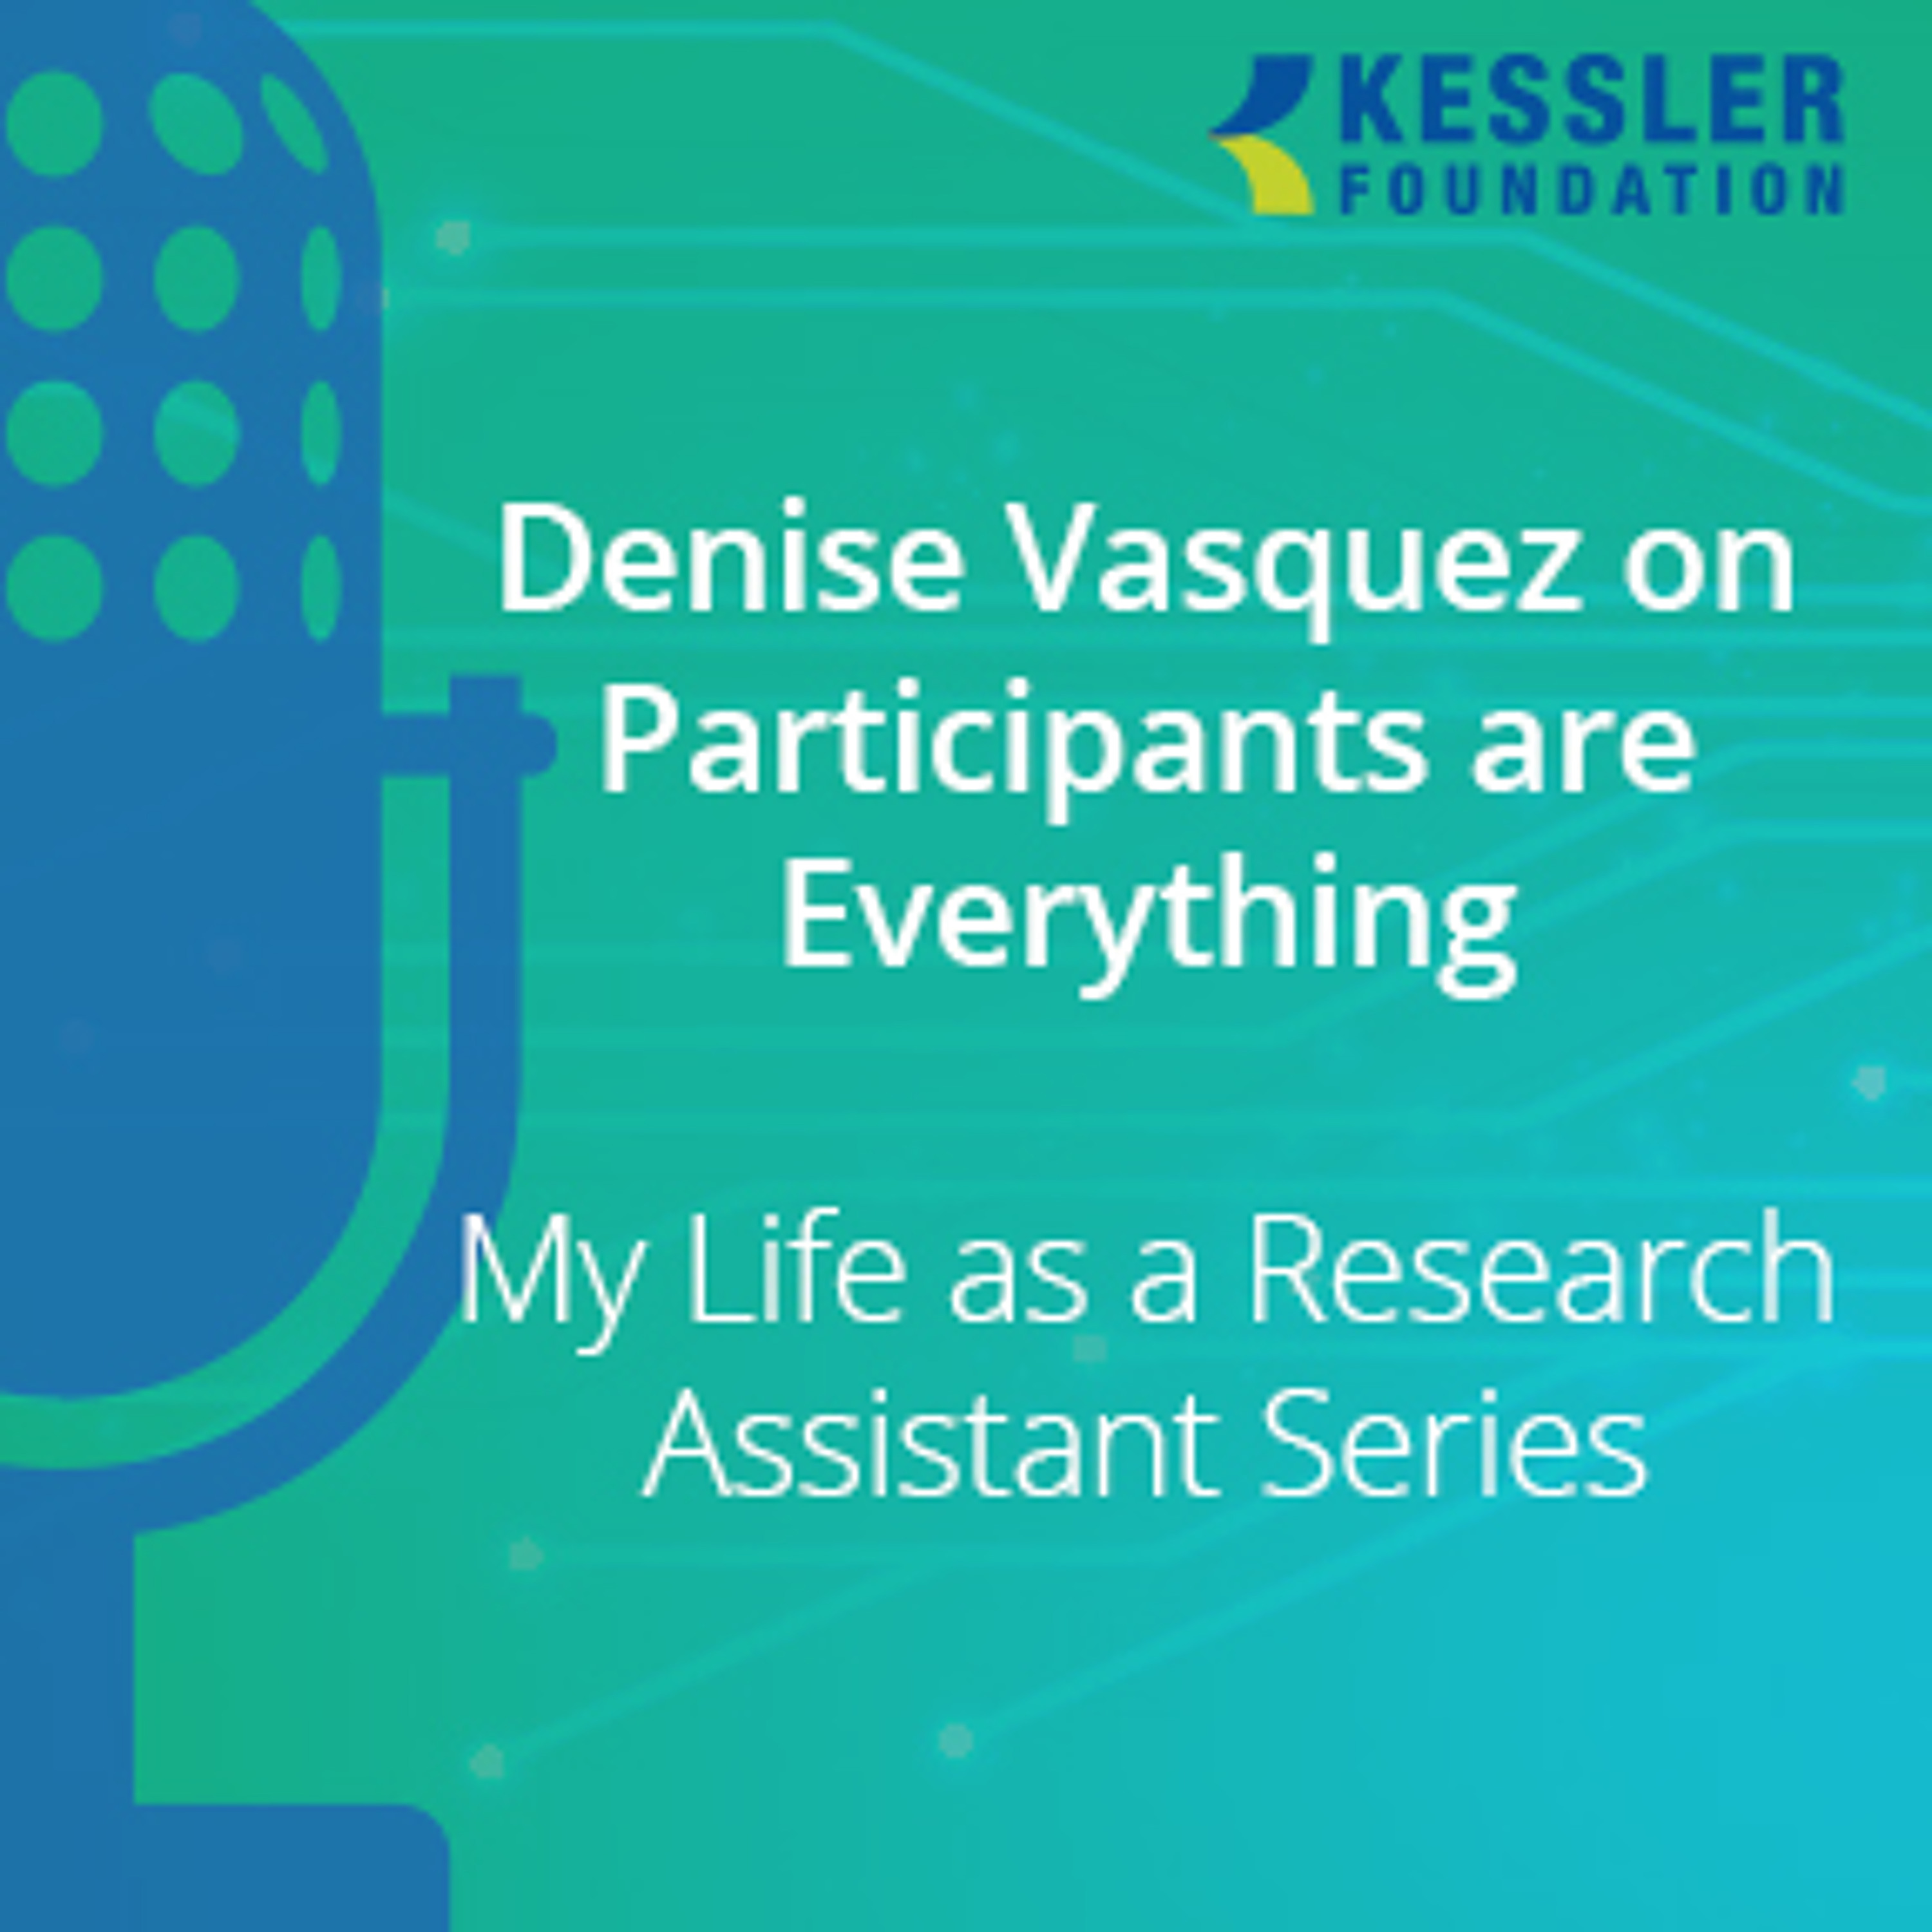 Denise Vasquez on Participants are Everything